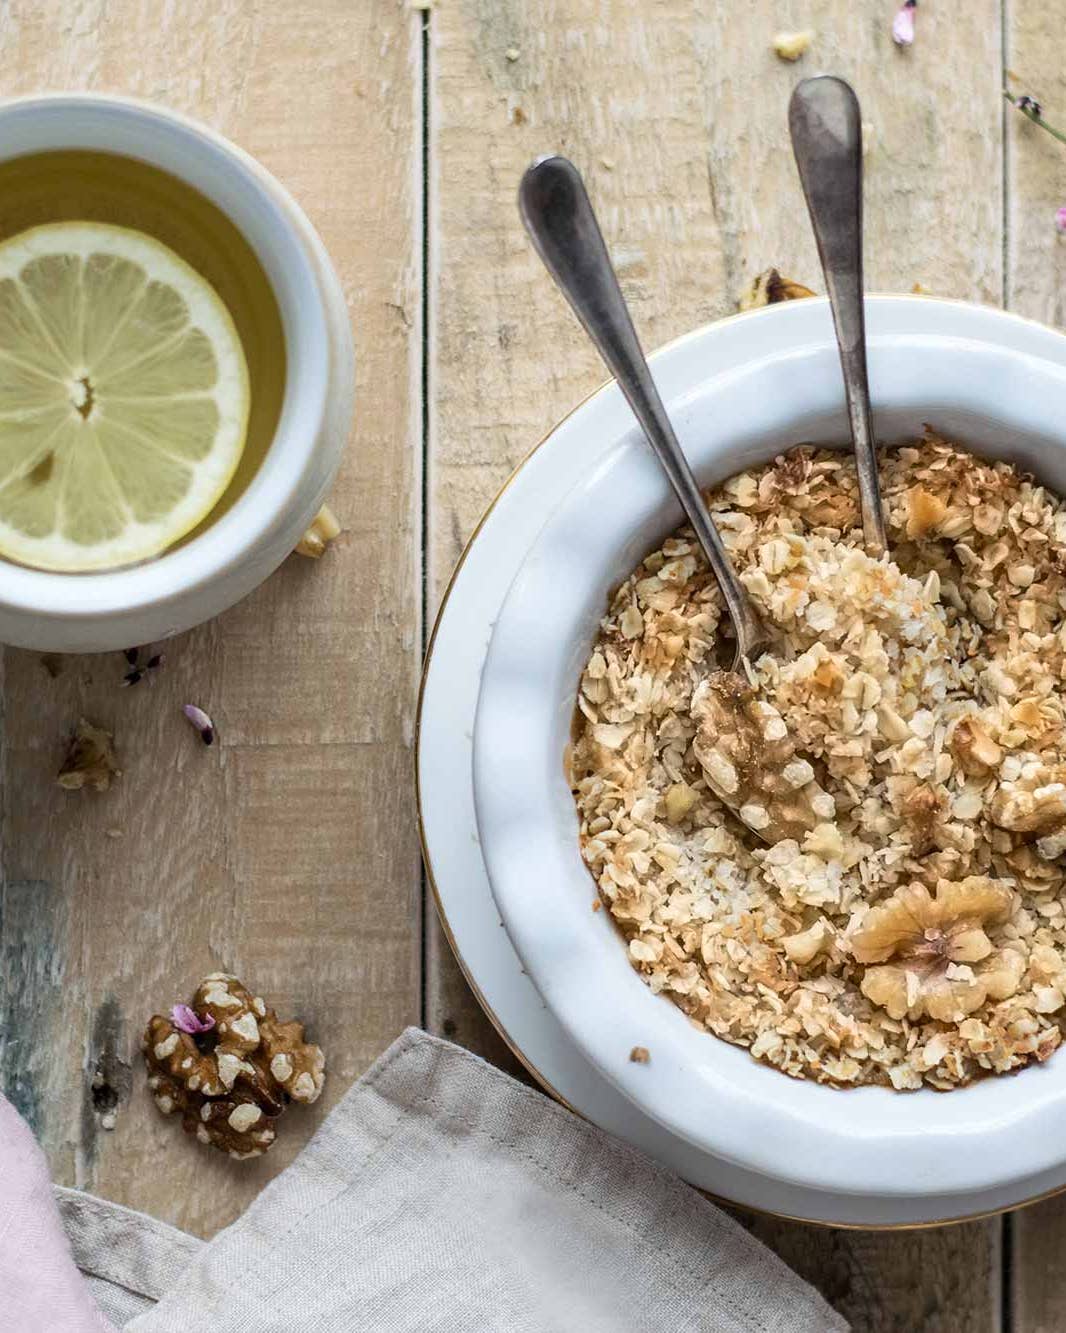 Bowl of oatmeal and cup of tea with lemon.